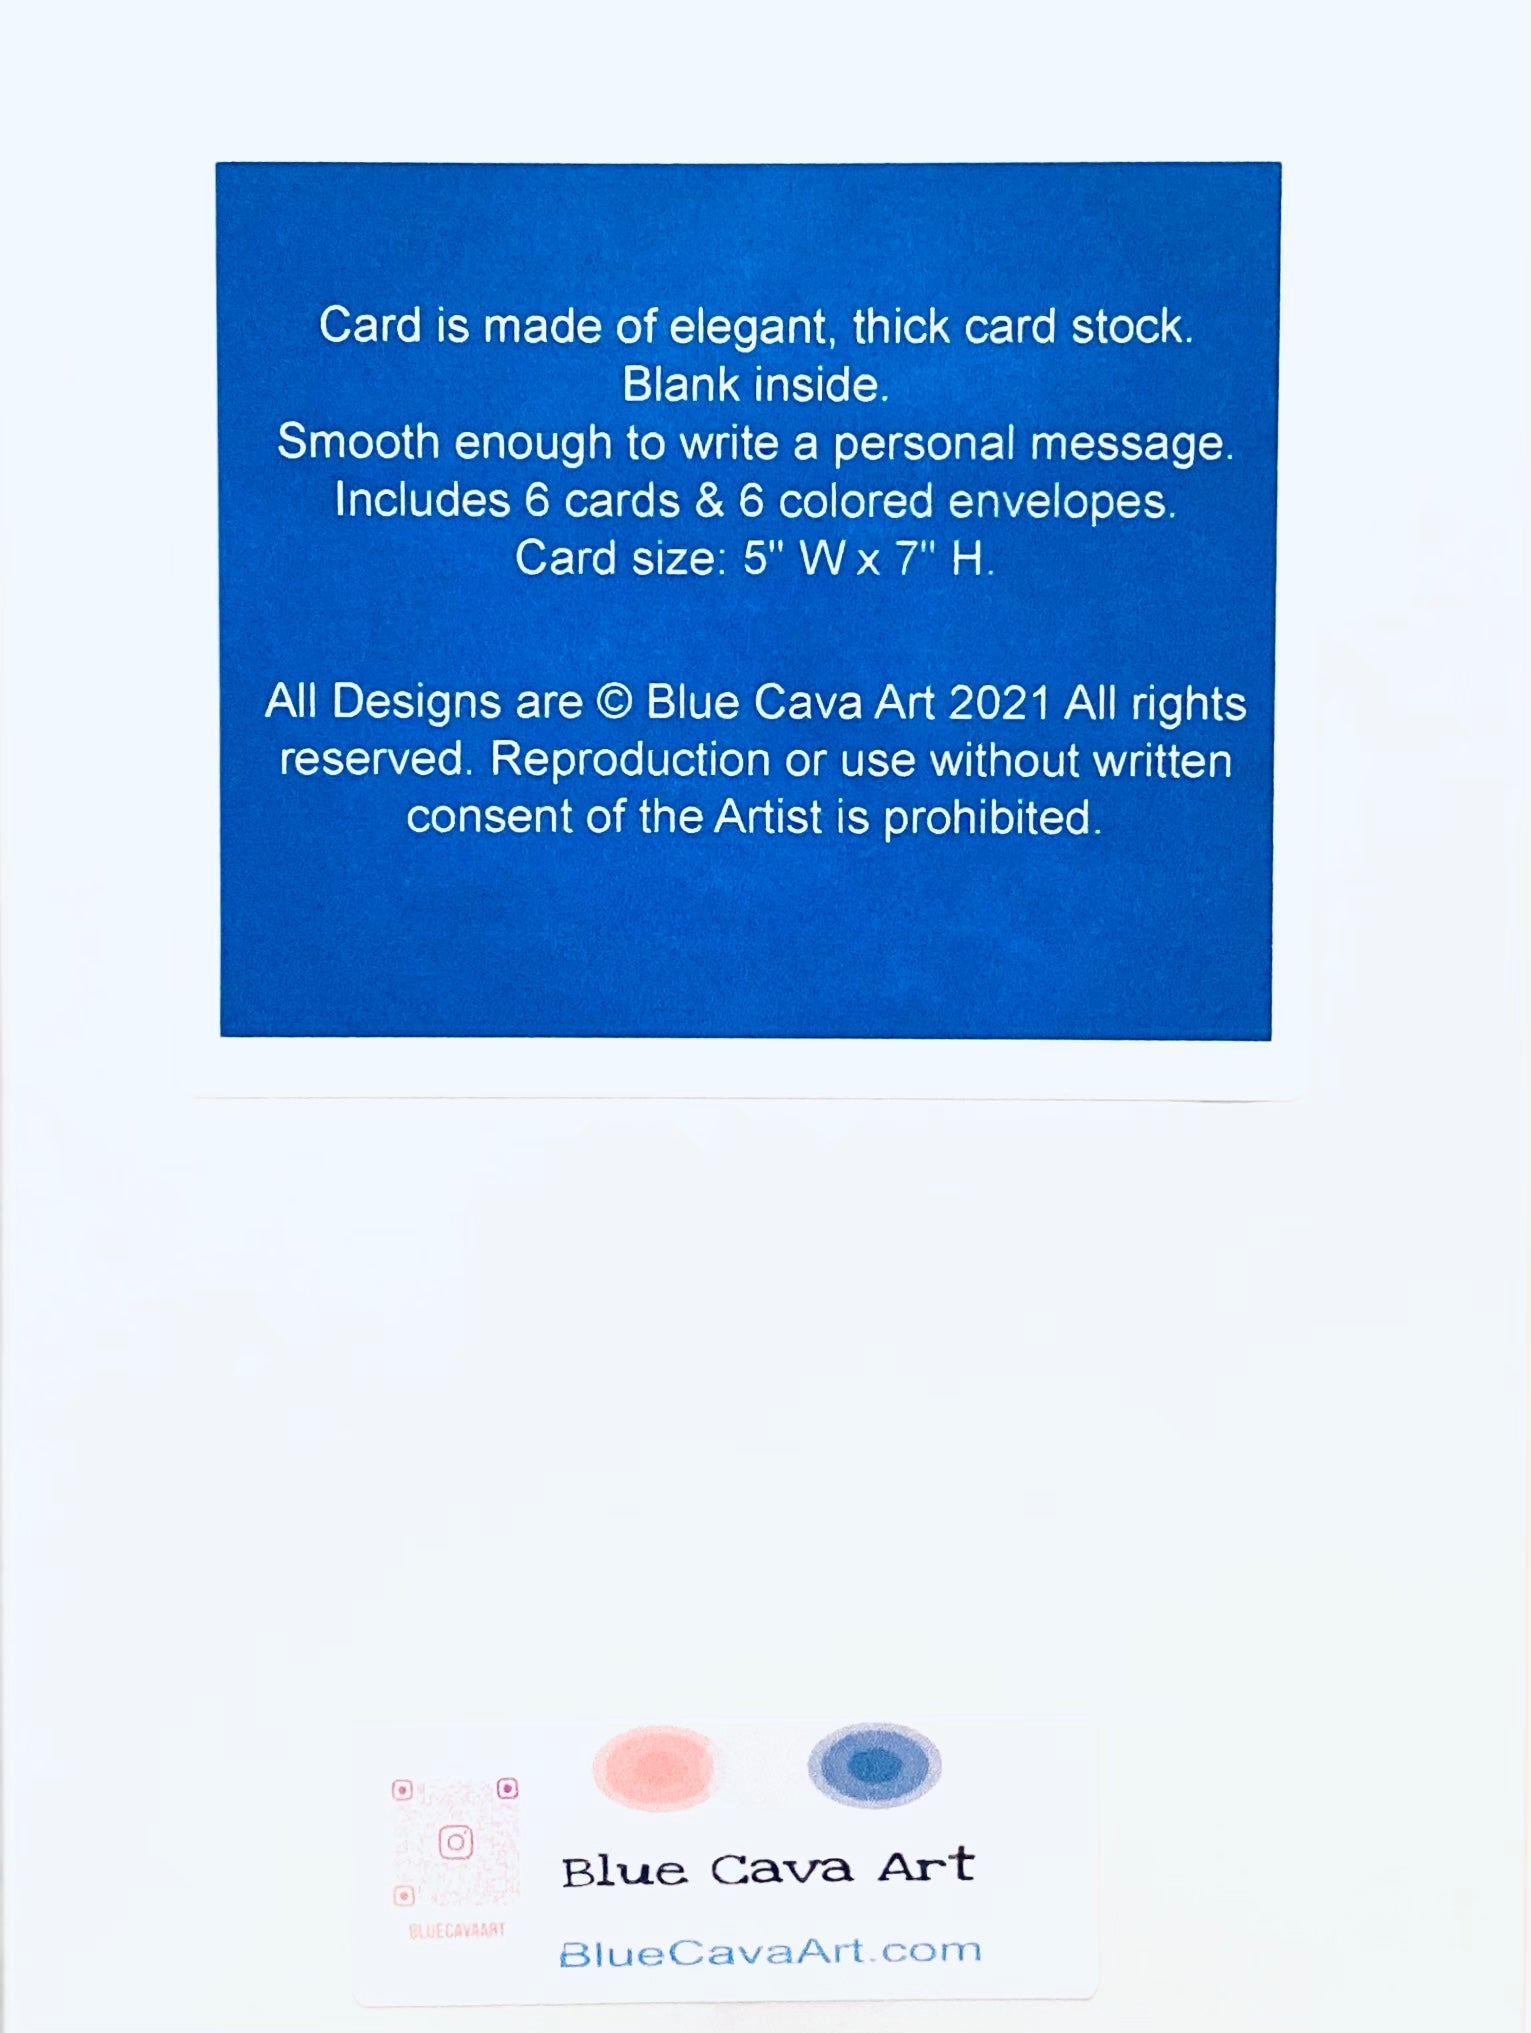 Let’s Keep in Touch Greeting card (Multiple colors available) - Blue Cava